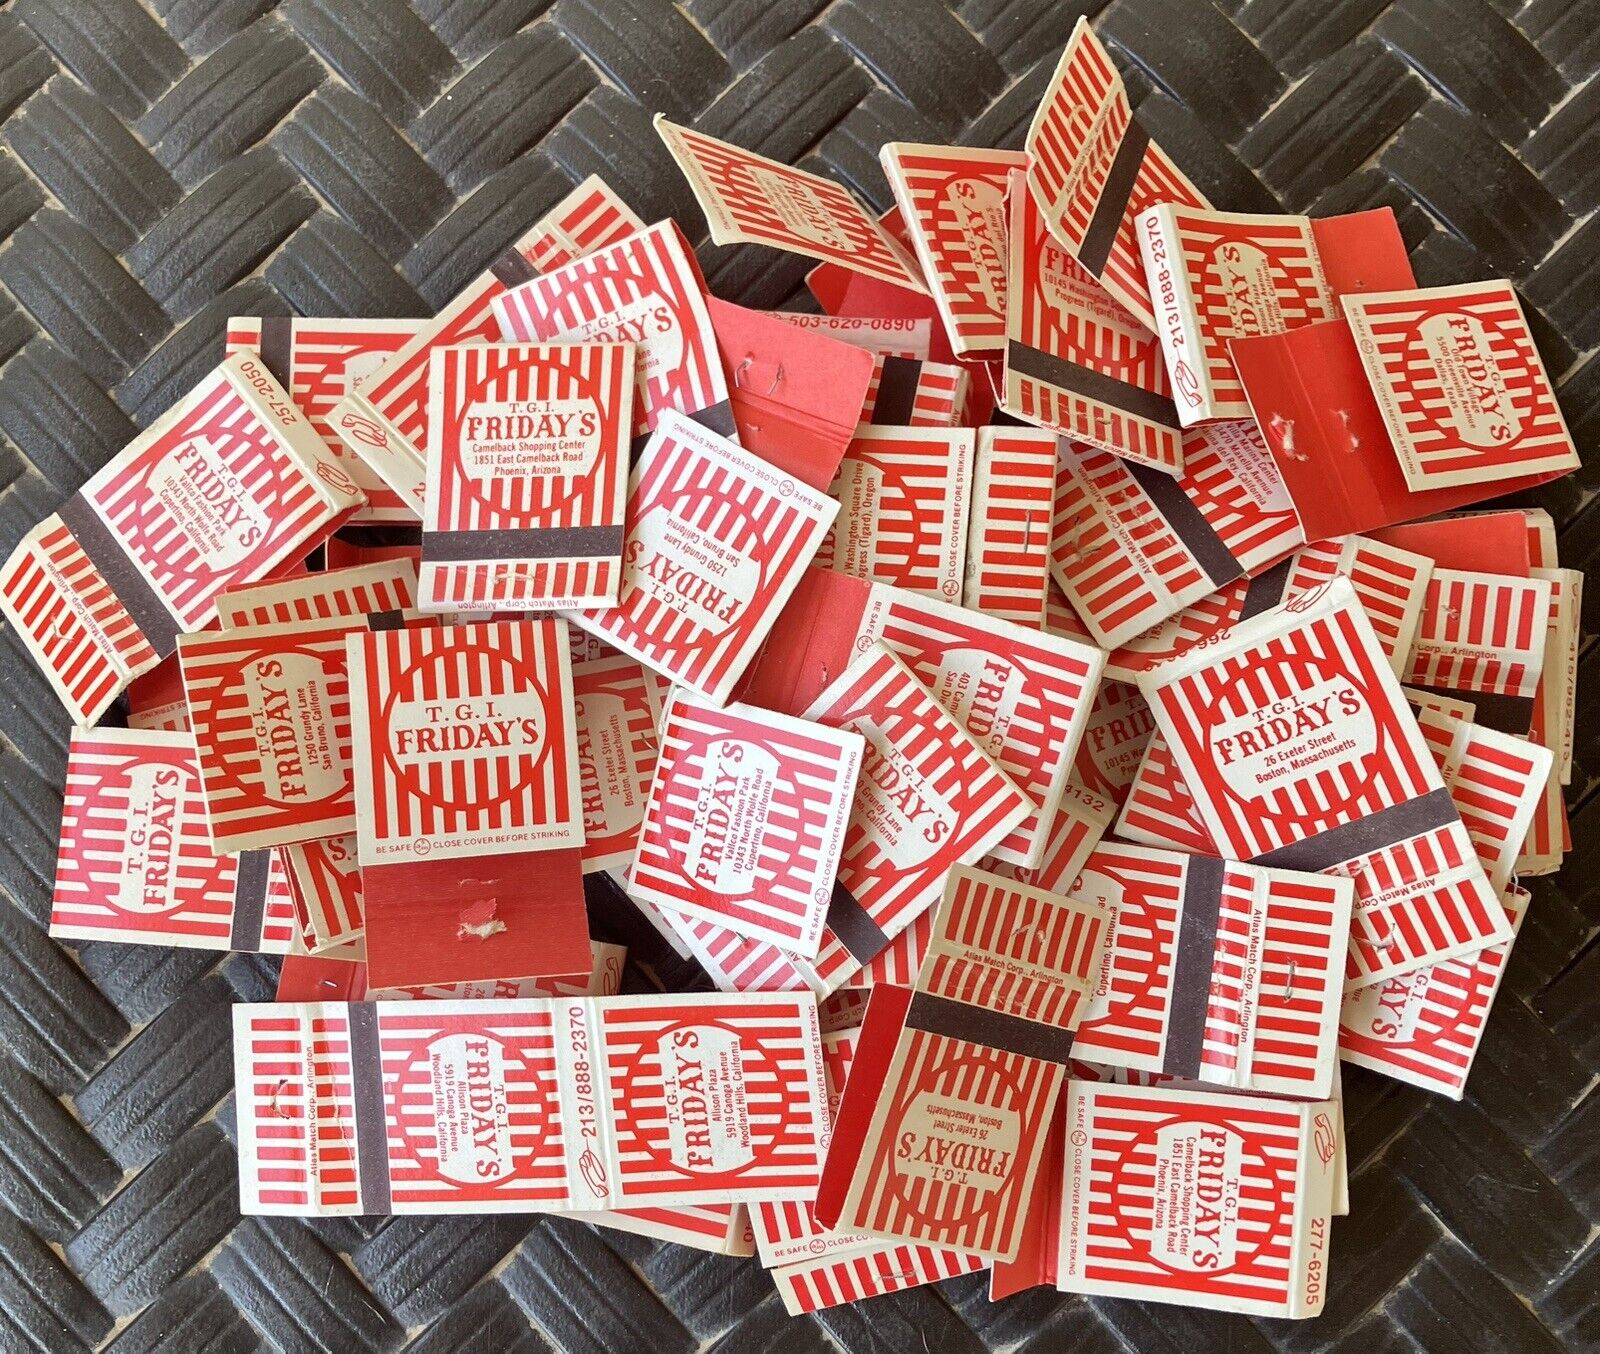 Lot of 50+ Vintage Matchbooks. All from various Fridays Restaurant Locations.